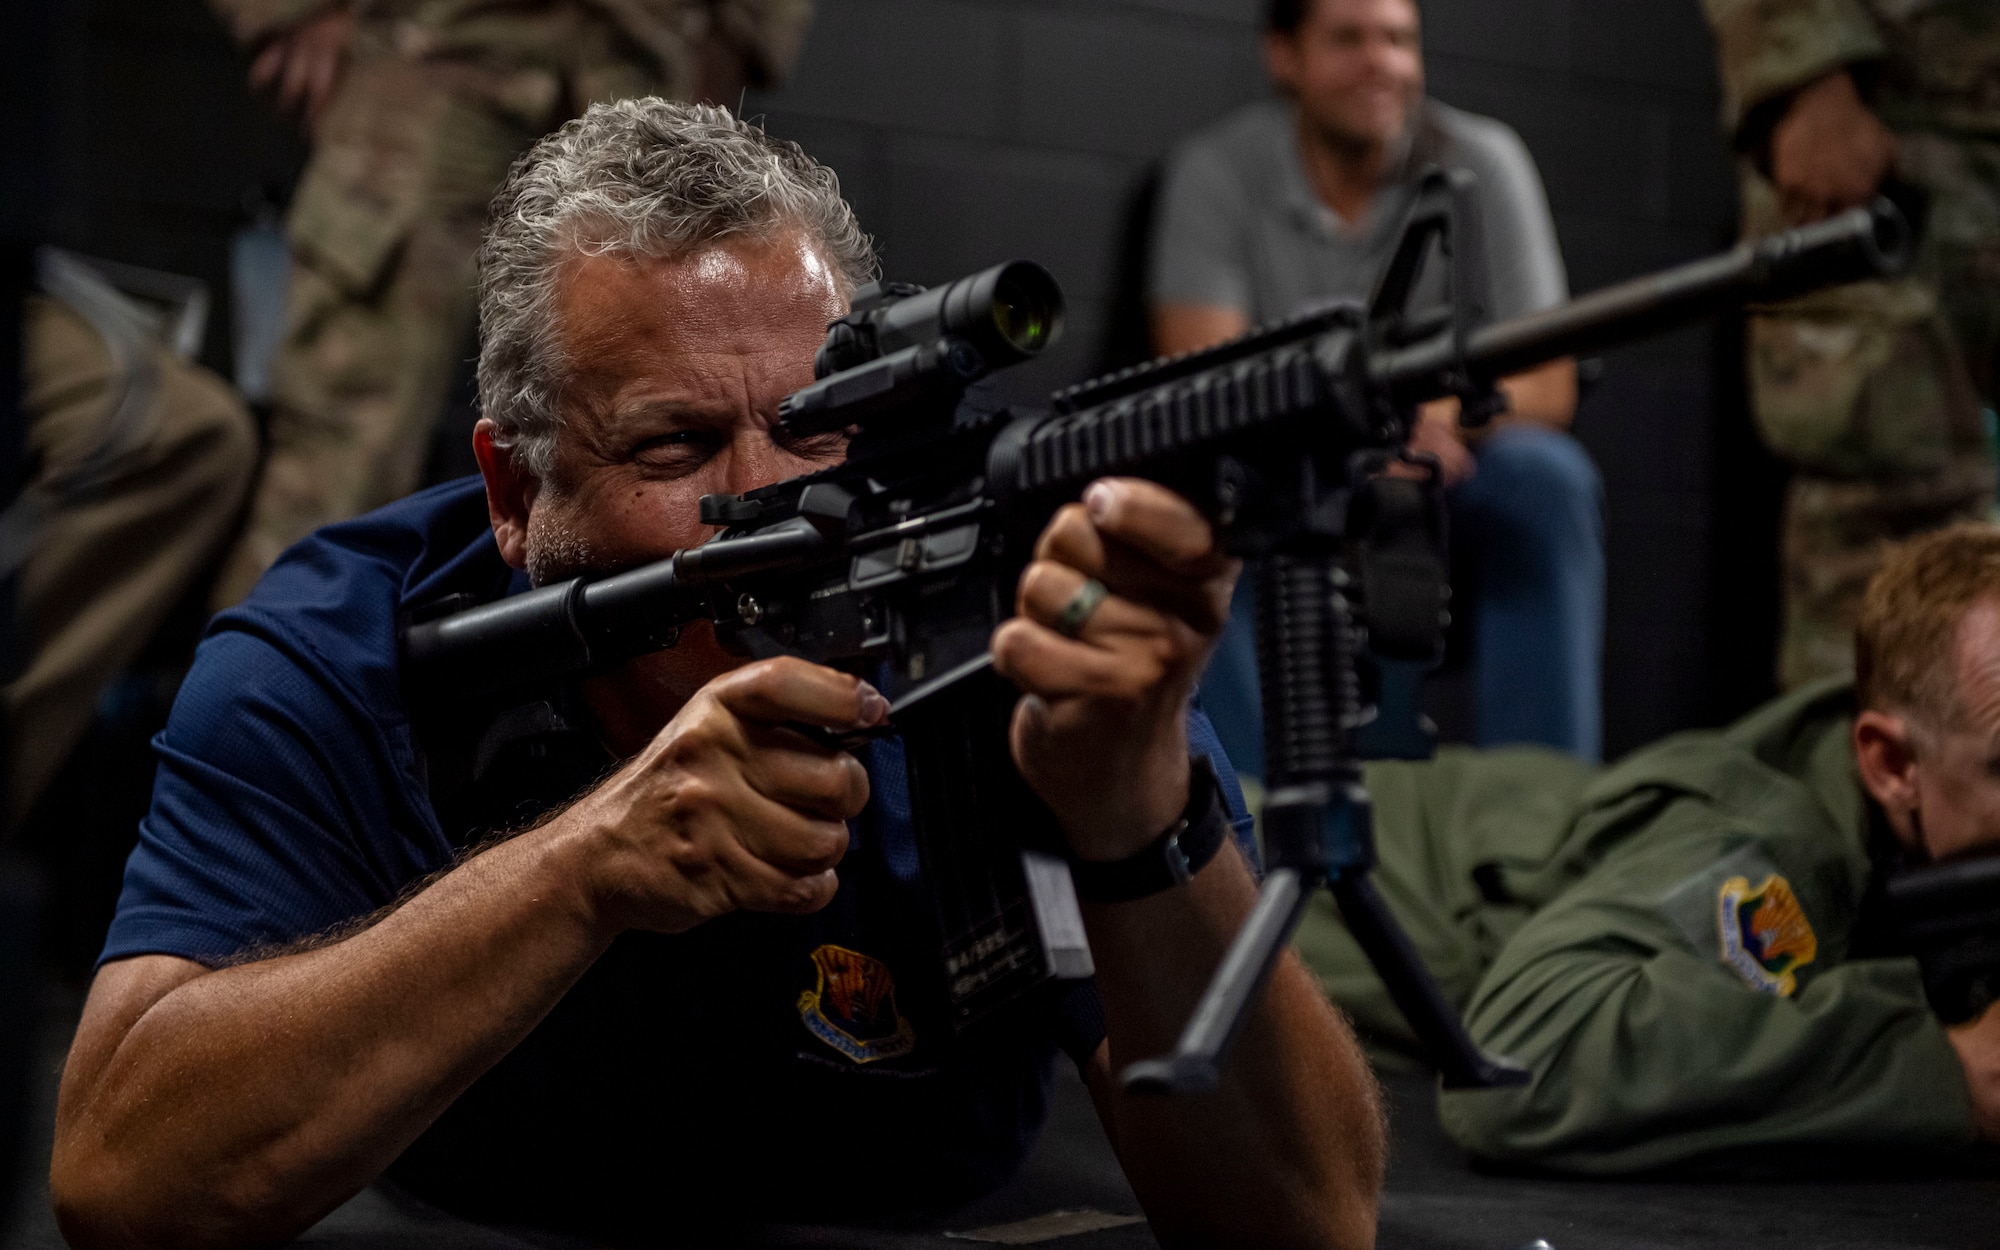 Andy Mayts, Air Mobility Command civic leader and partner of Shumaker, Loop and Kendrick LLC, takes aim during a weapons simulation training at the 1st Combat Camera Squadron located at Joint Base Charleston, South Carolina, April 21, 2022. The 1st CTCS is one of two active-duty Combat Camera units in the Air Force and is responsible for collecting imagery in support of strategic operations worldwide. (U.S. Air Force photo by Airman 1st Class Lauren Cobin)